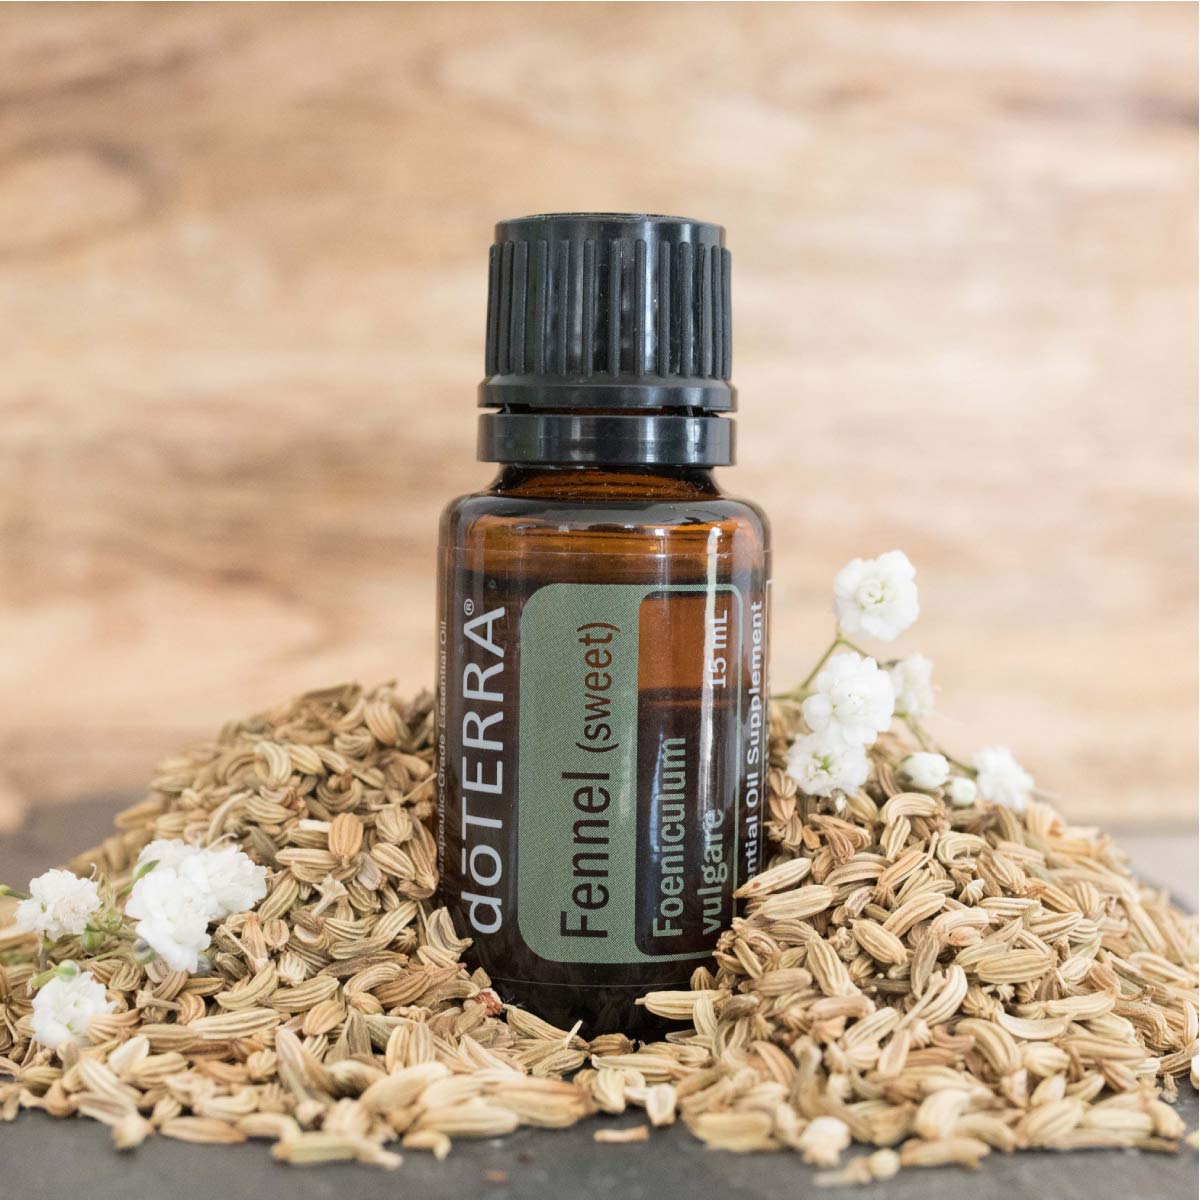 Bottle of Fennel essential oil surrounded by fennel seeds. What does Fennel oil smell like? Fennel oil has a sweet aroma and taste that is often compared to that of licorice.